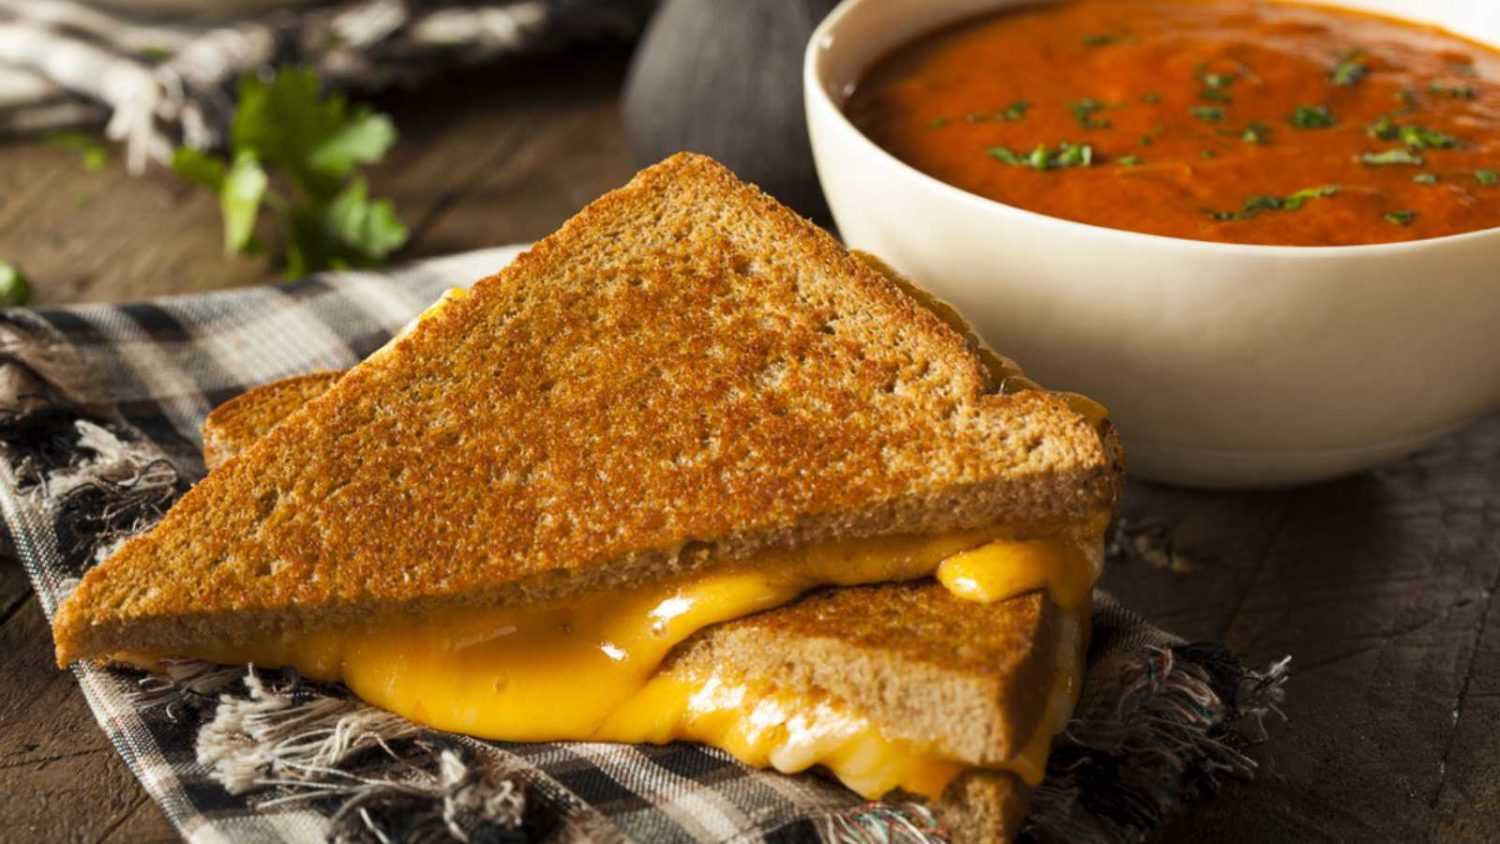 Grilled Cheese Sandwich And Tomato Soup